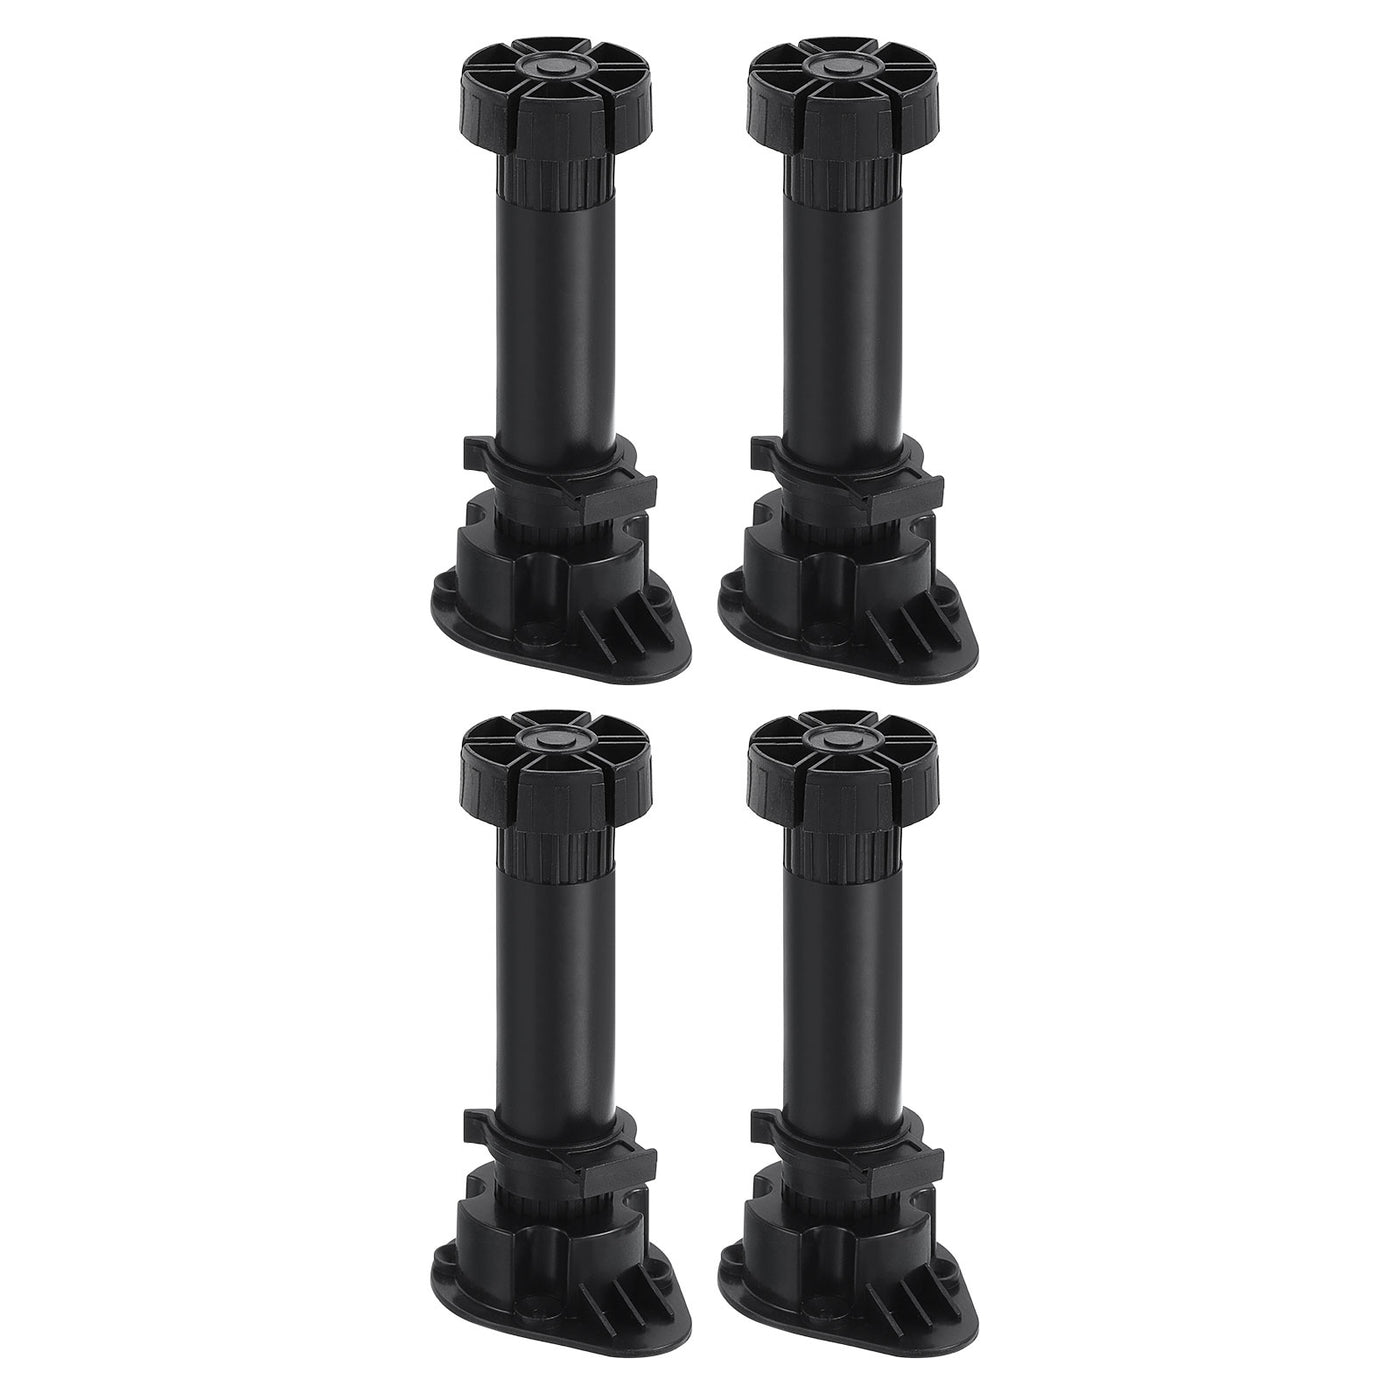 uxcell Uxcell Adjustable Legs, 4Pcs 44 x 150mm - Furniture Leveling Foot, Thick Thin Legs Leveler Support Frame for Bed Sofa Coffee Table Bathroom Cabinet (Black)